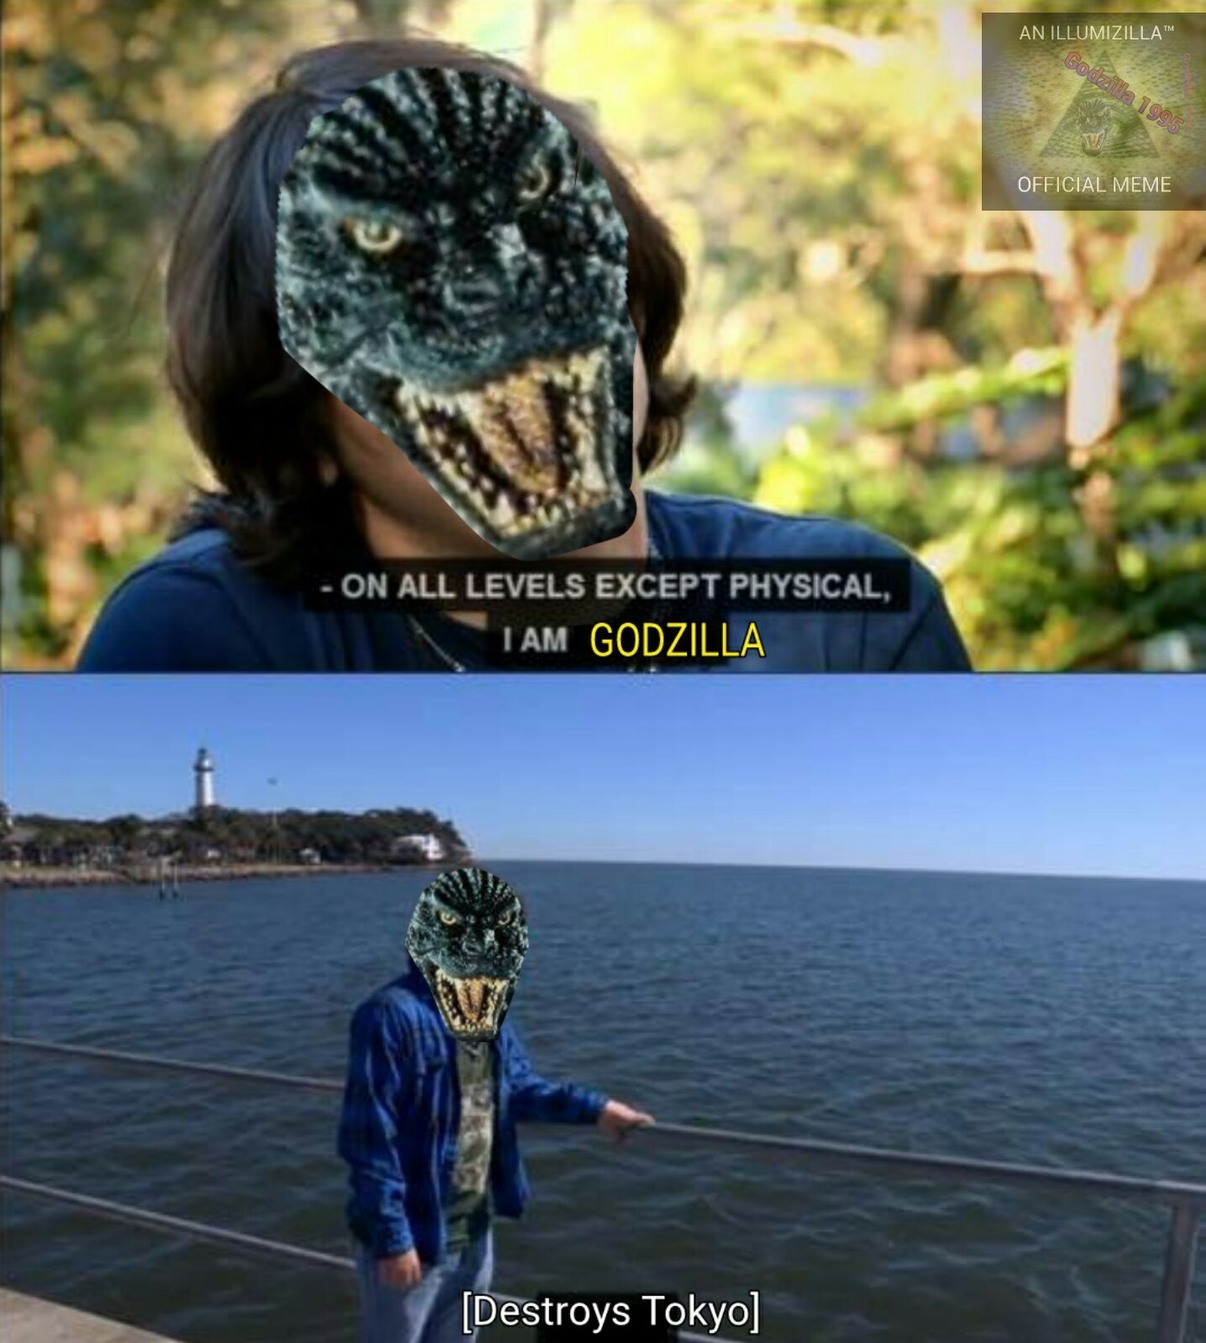 But am I the real Godzilla here on Memedroid